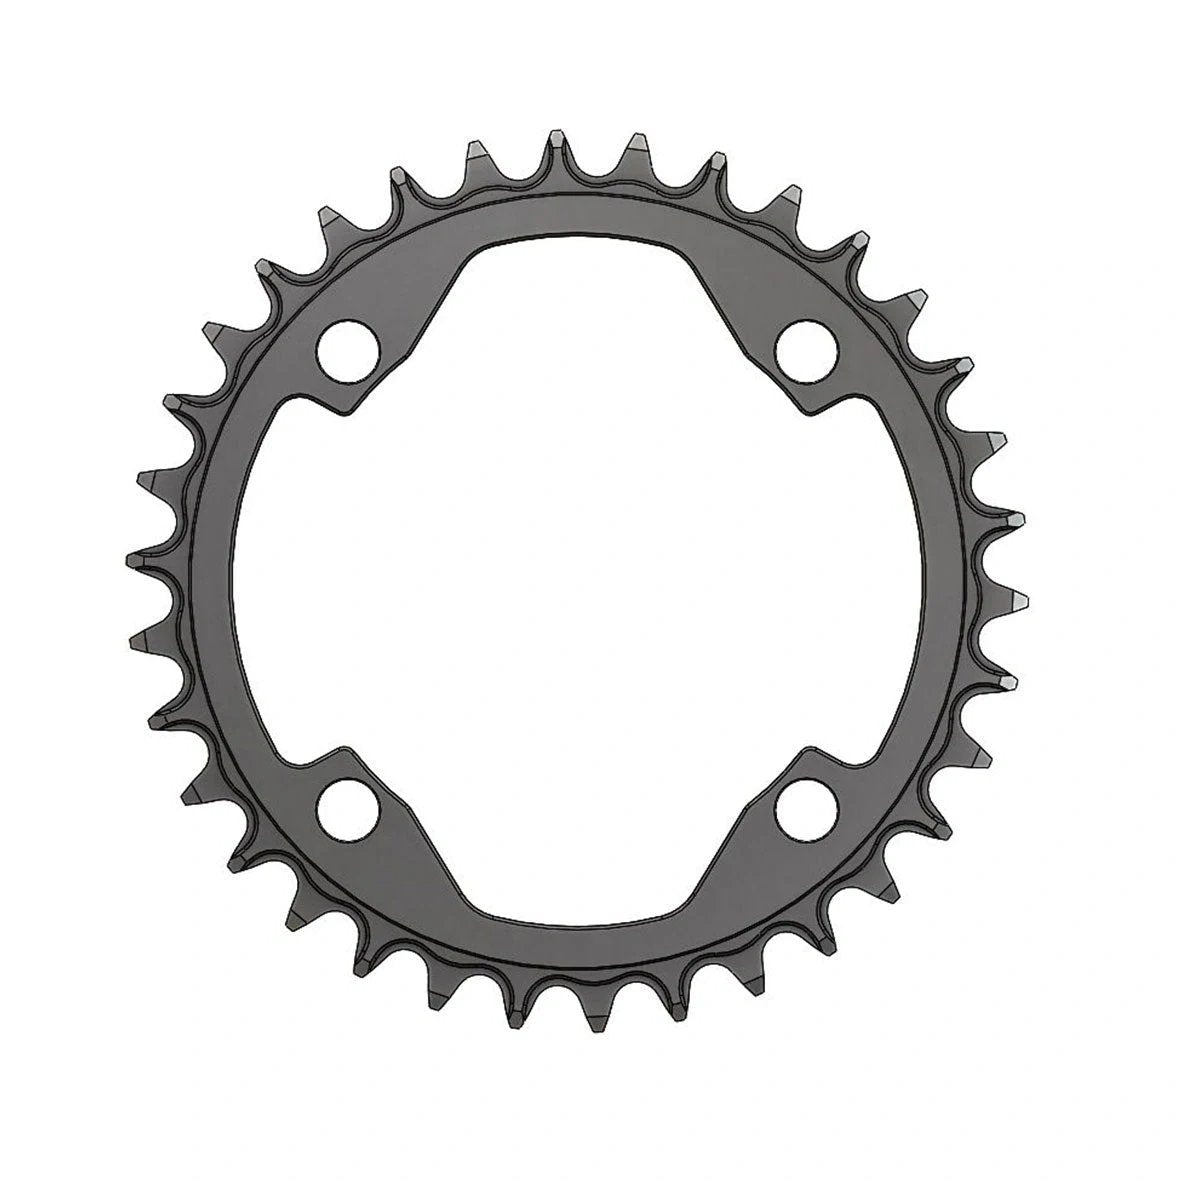 Pilo 34T 104Bcd Chainring For Hg+ Cranks